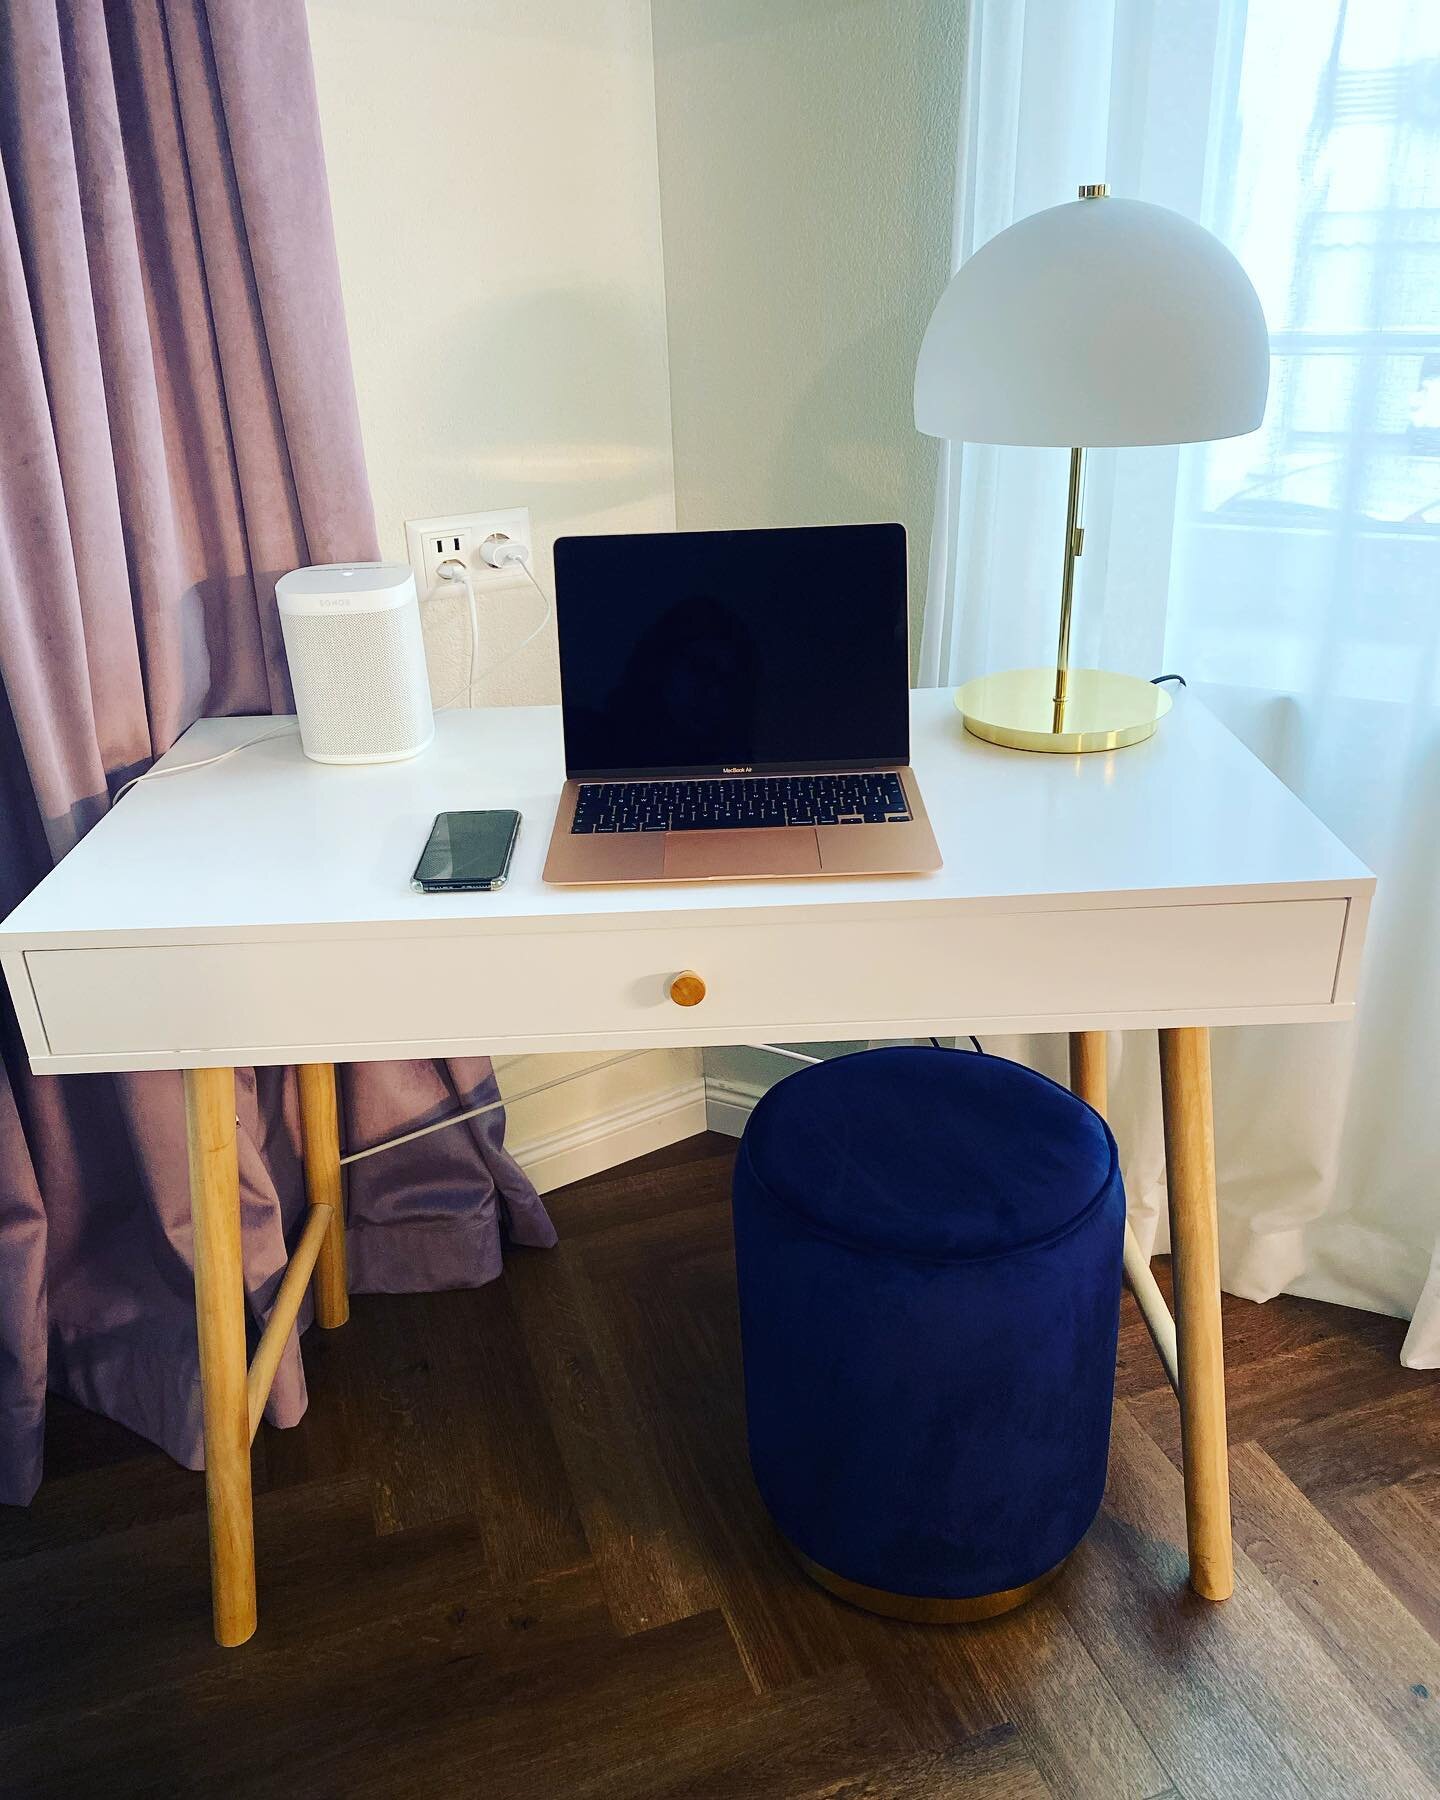 Home Office 
@cozyflats_zurich 
&bull;
&bull;
&bull;
We@habe affordable Studios for Home Office with different spaces.
Send your request per email: home@cozyflats-zurich.com
#homeoffice #homeofficeideas #idistudent #idistudents  #zurich #switzerland